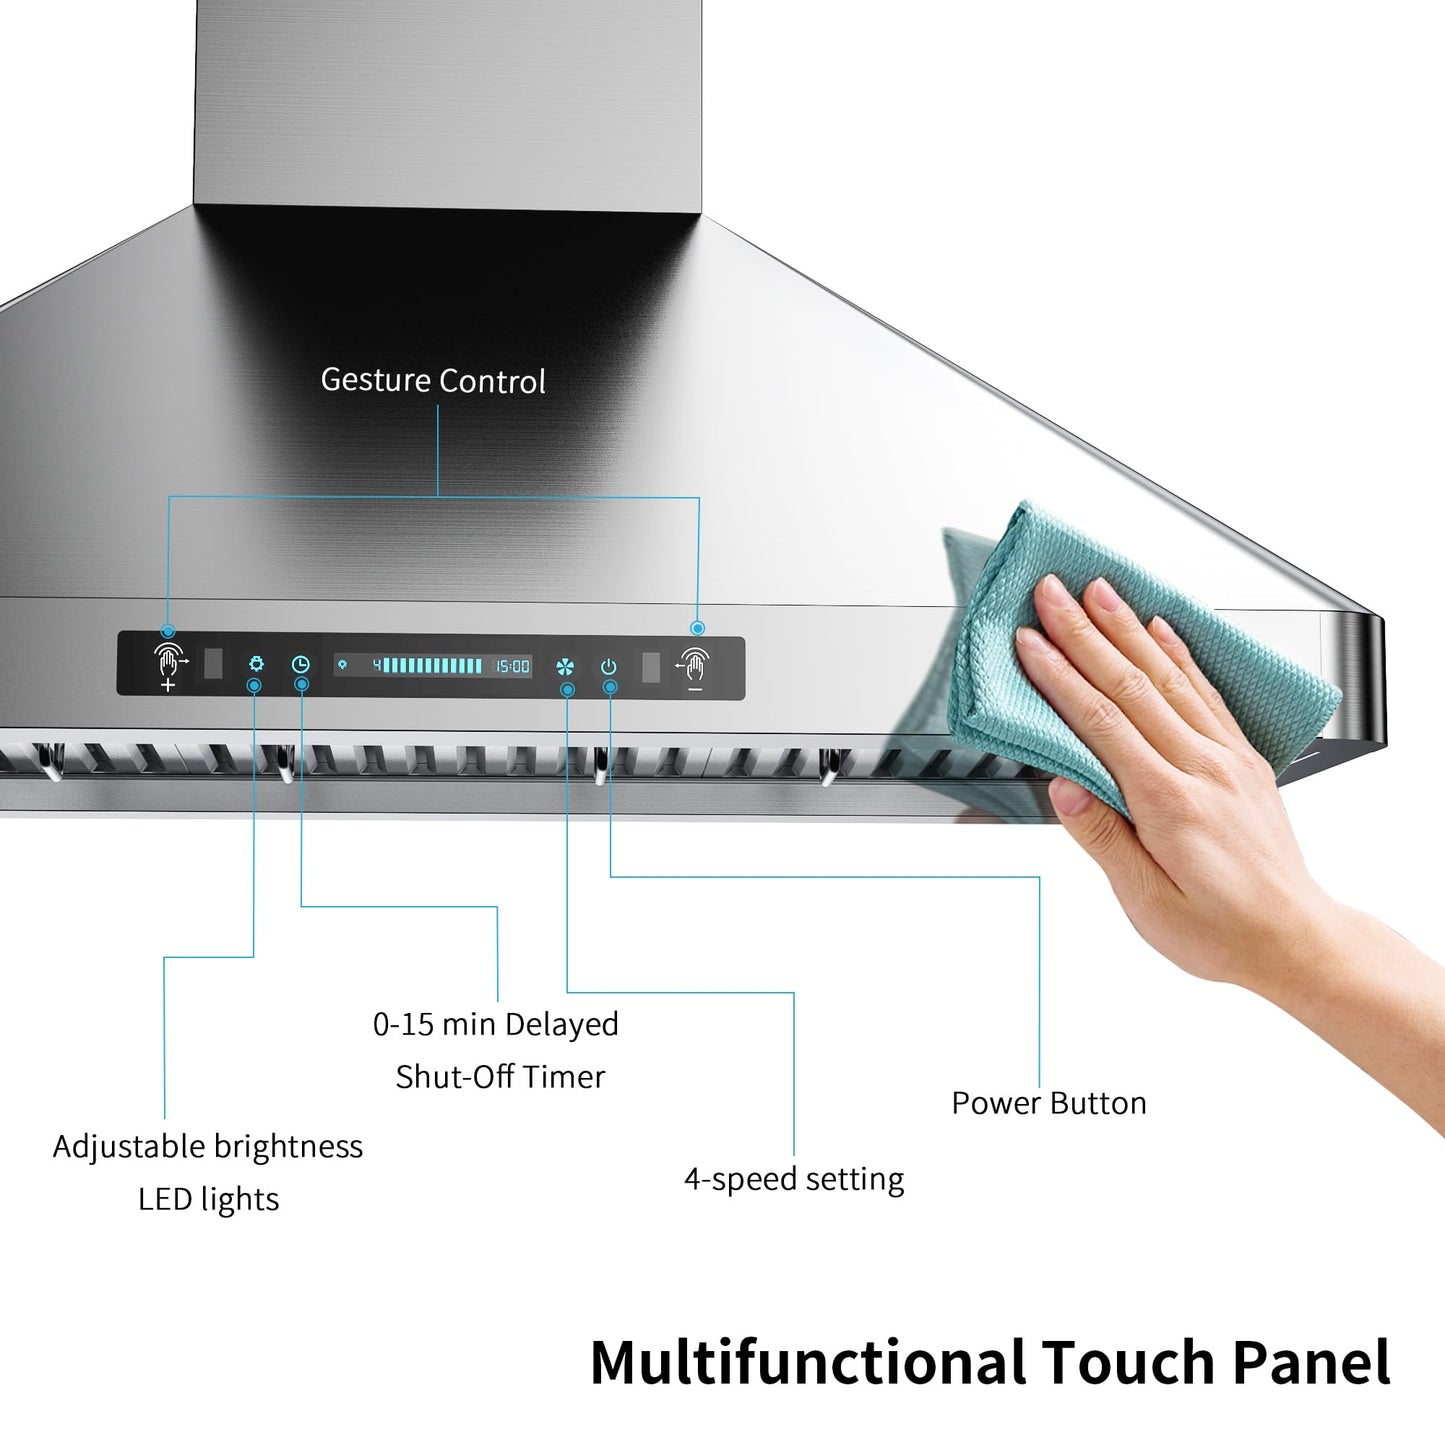 IKTCH Wall Mounted Range Hood 30 inch, 900 CFM Ducted/Ductless Range Hood, Stainless Steel Range Hood with Gesture Sensing & Touch Control IKP02R-30